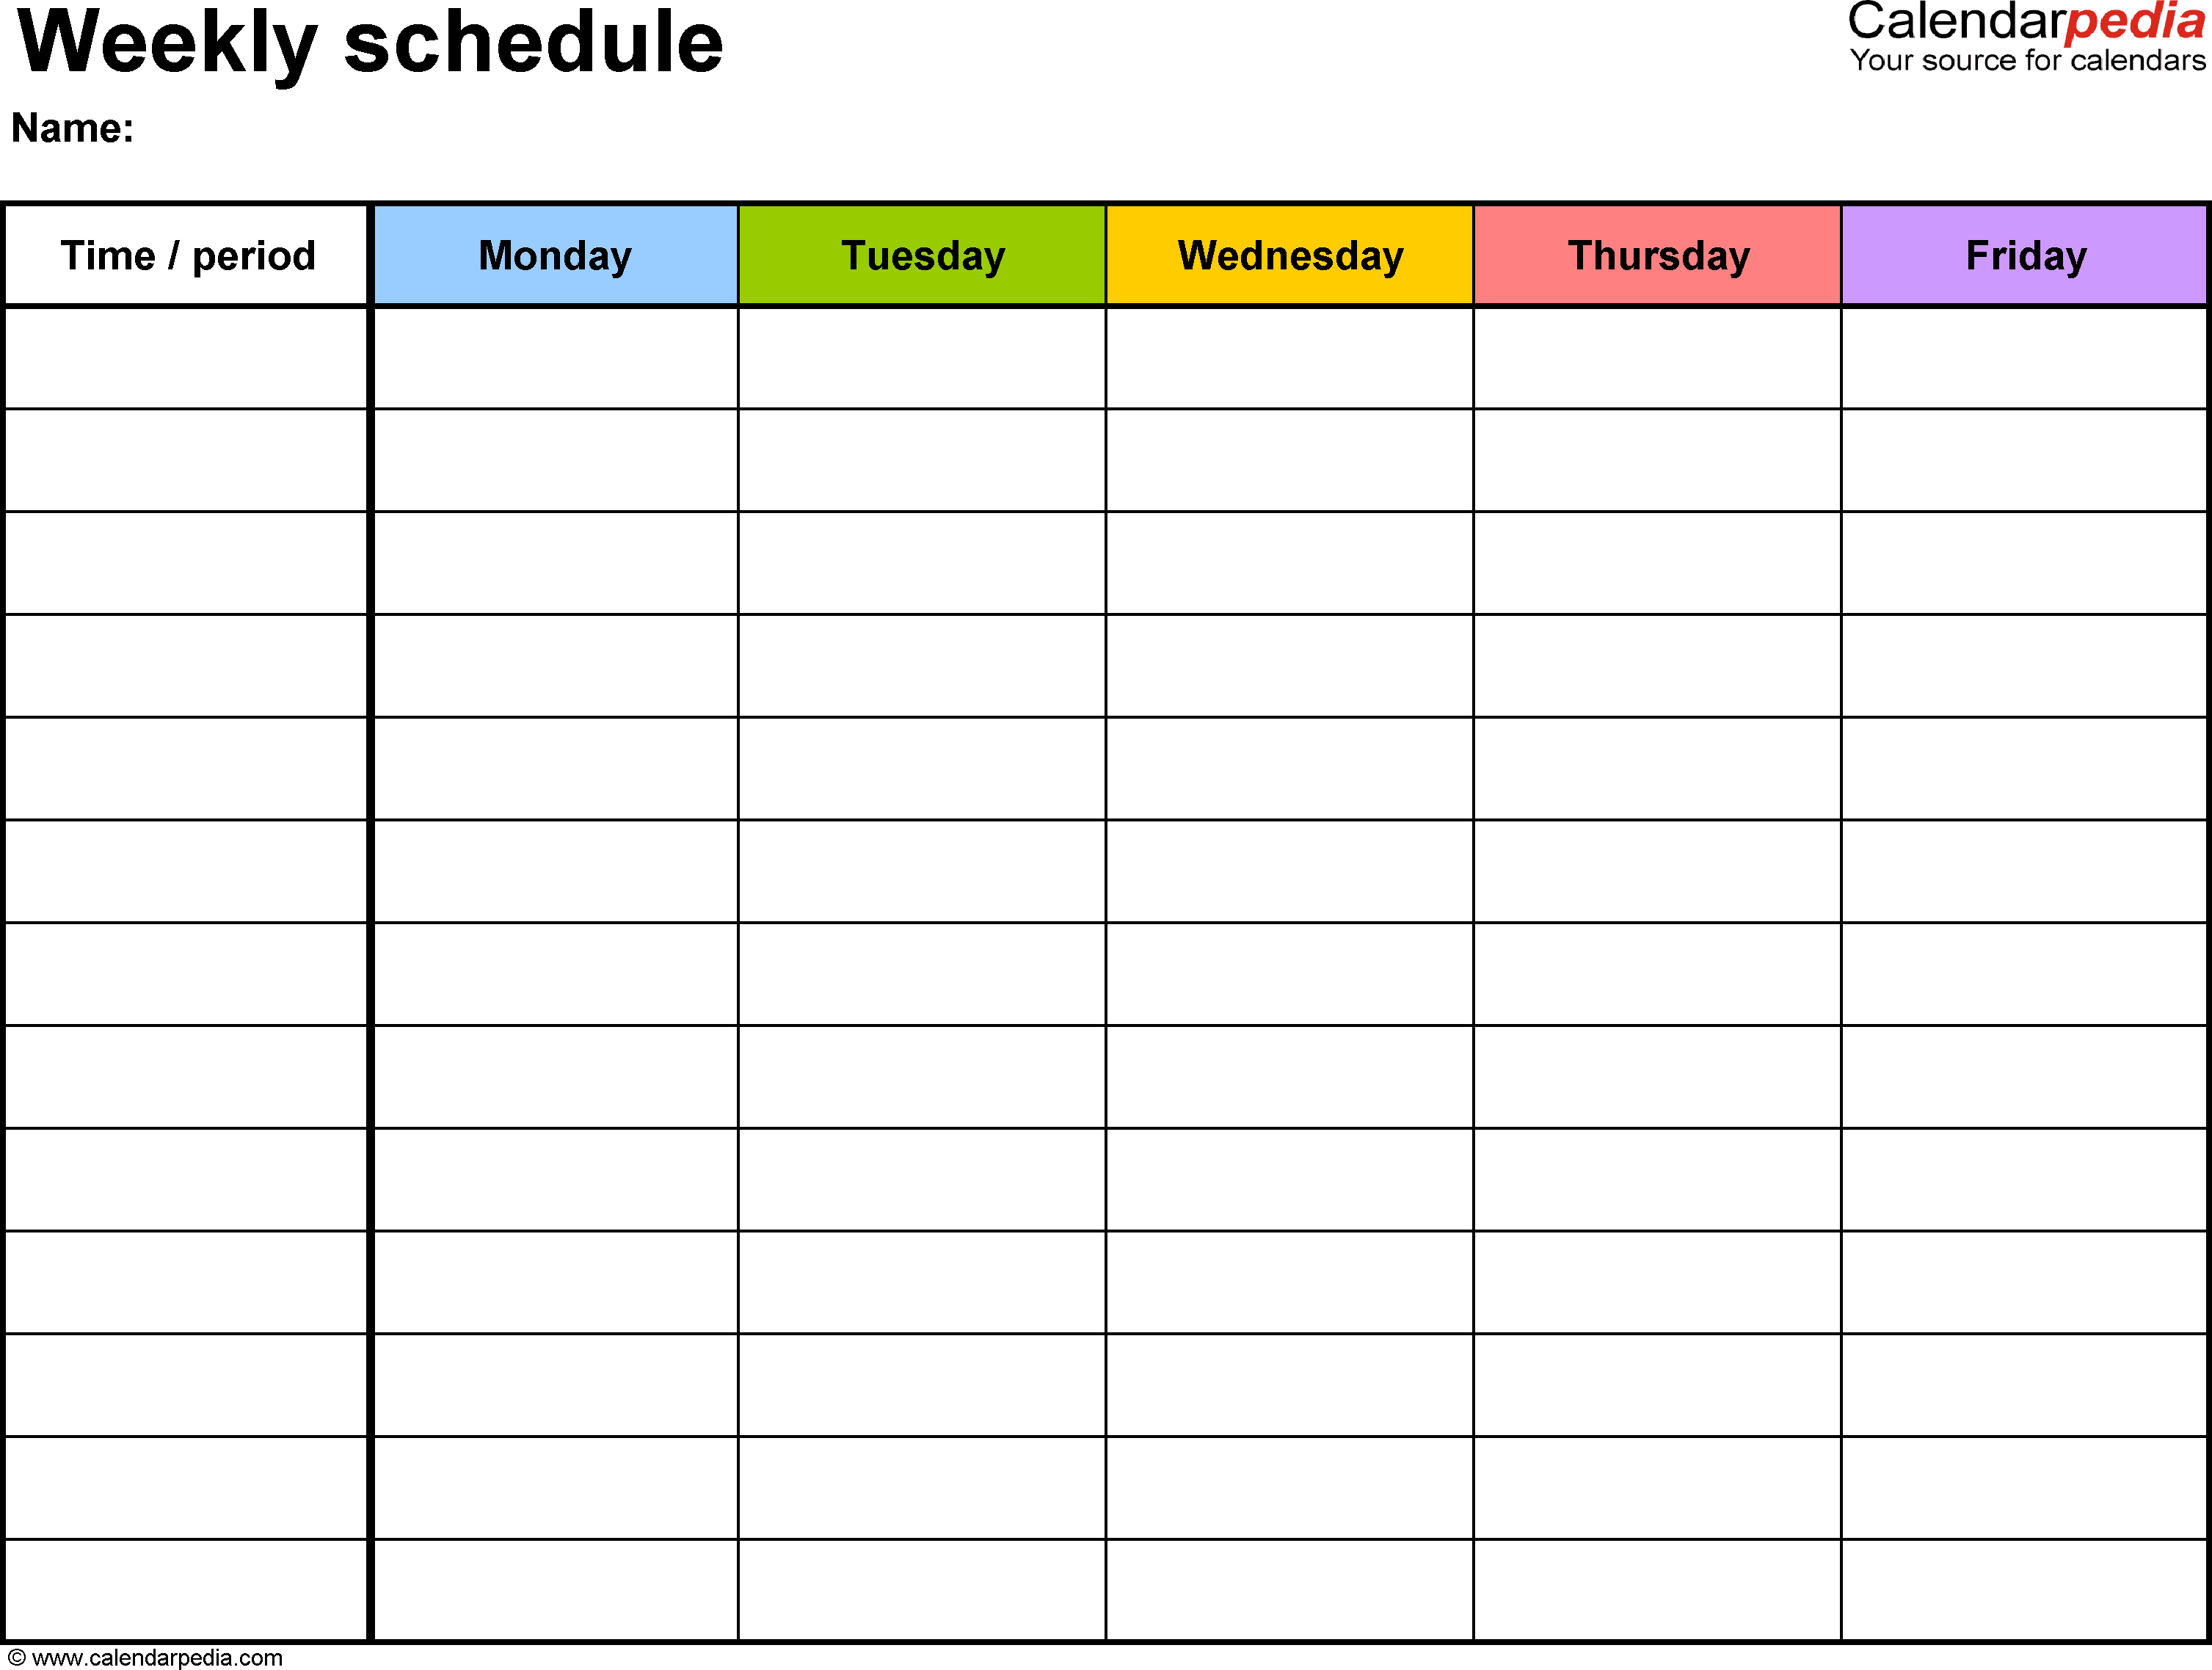 Free Weekly Schedule Templates For Word - 18 Templates - Free Printable Weekly Appointment Sheets